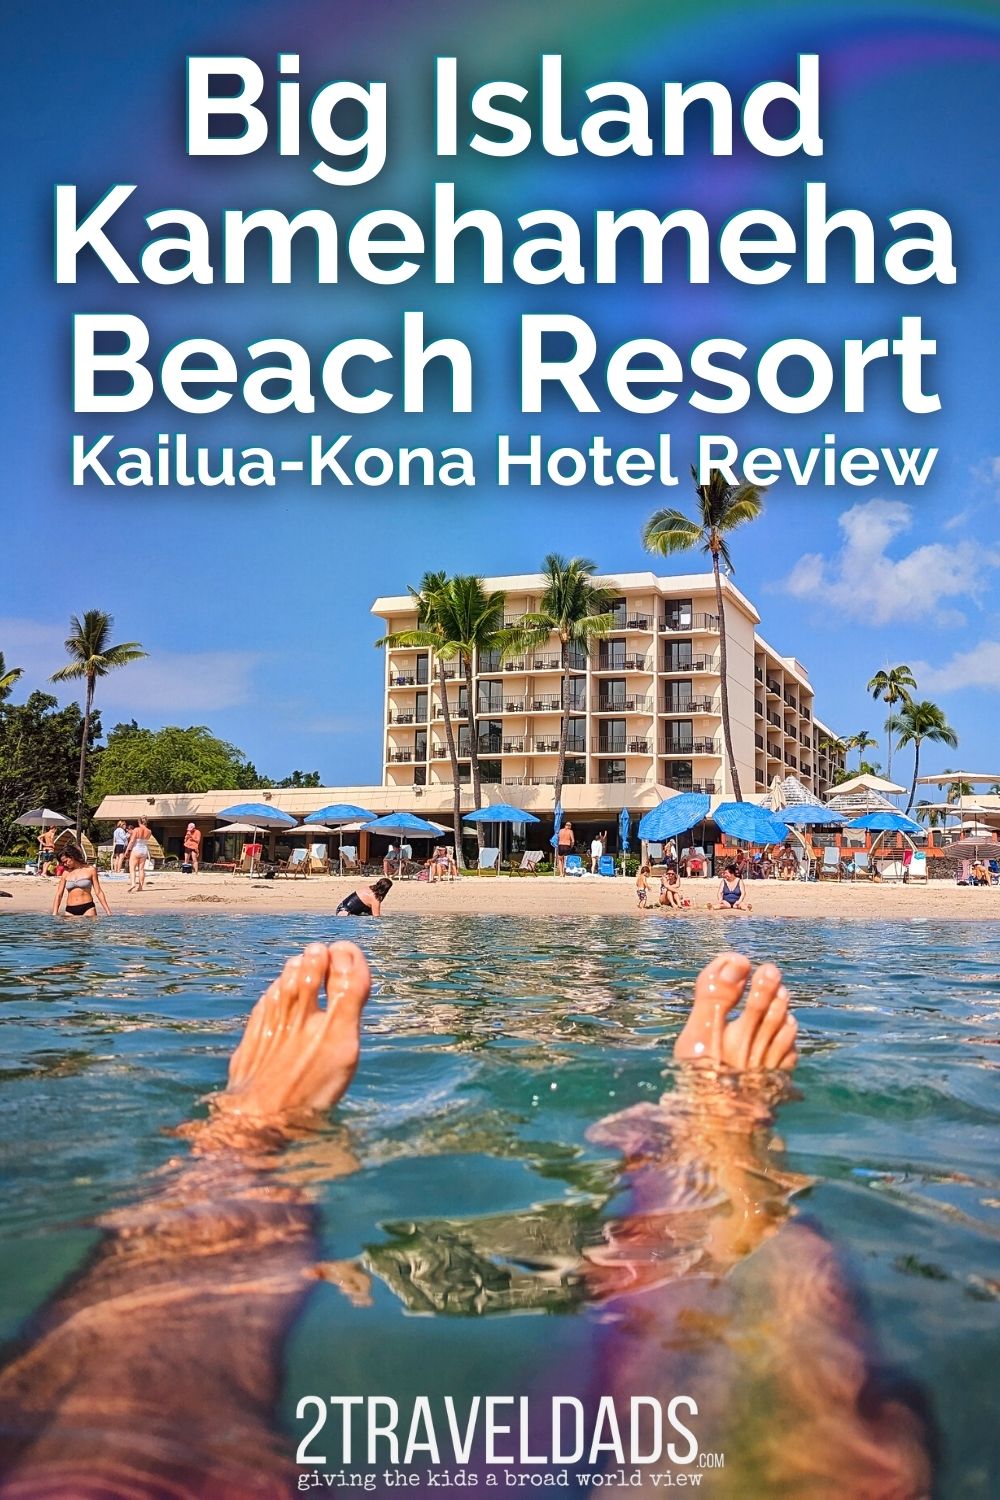 Staying at the King Kamehameha Beach Resort in Kailua-Kona is a great launch point for a Big Island vacation. See what's great about this Courtyard Marriott location, things to do in Kona and trip planning tips.